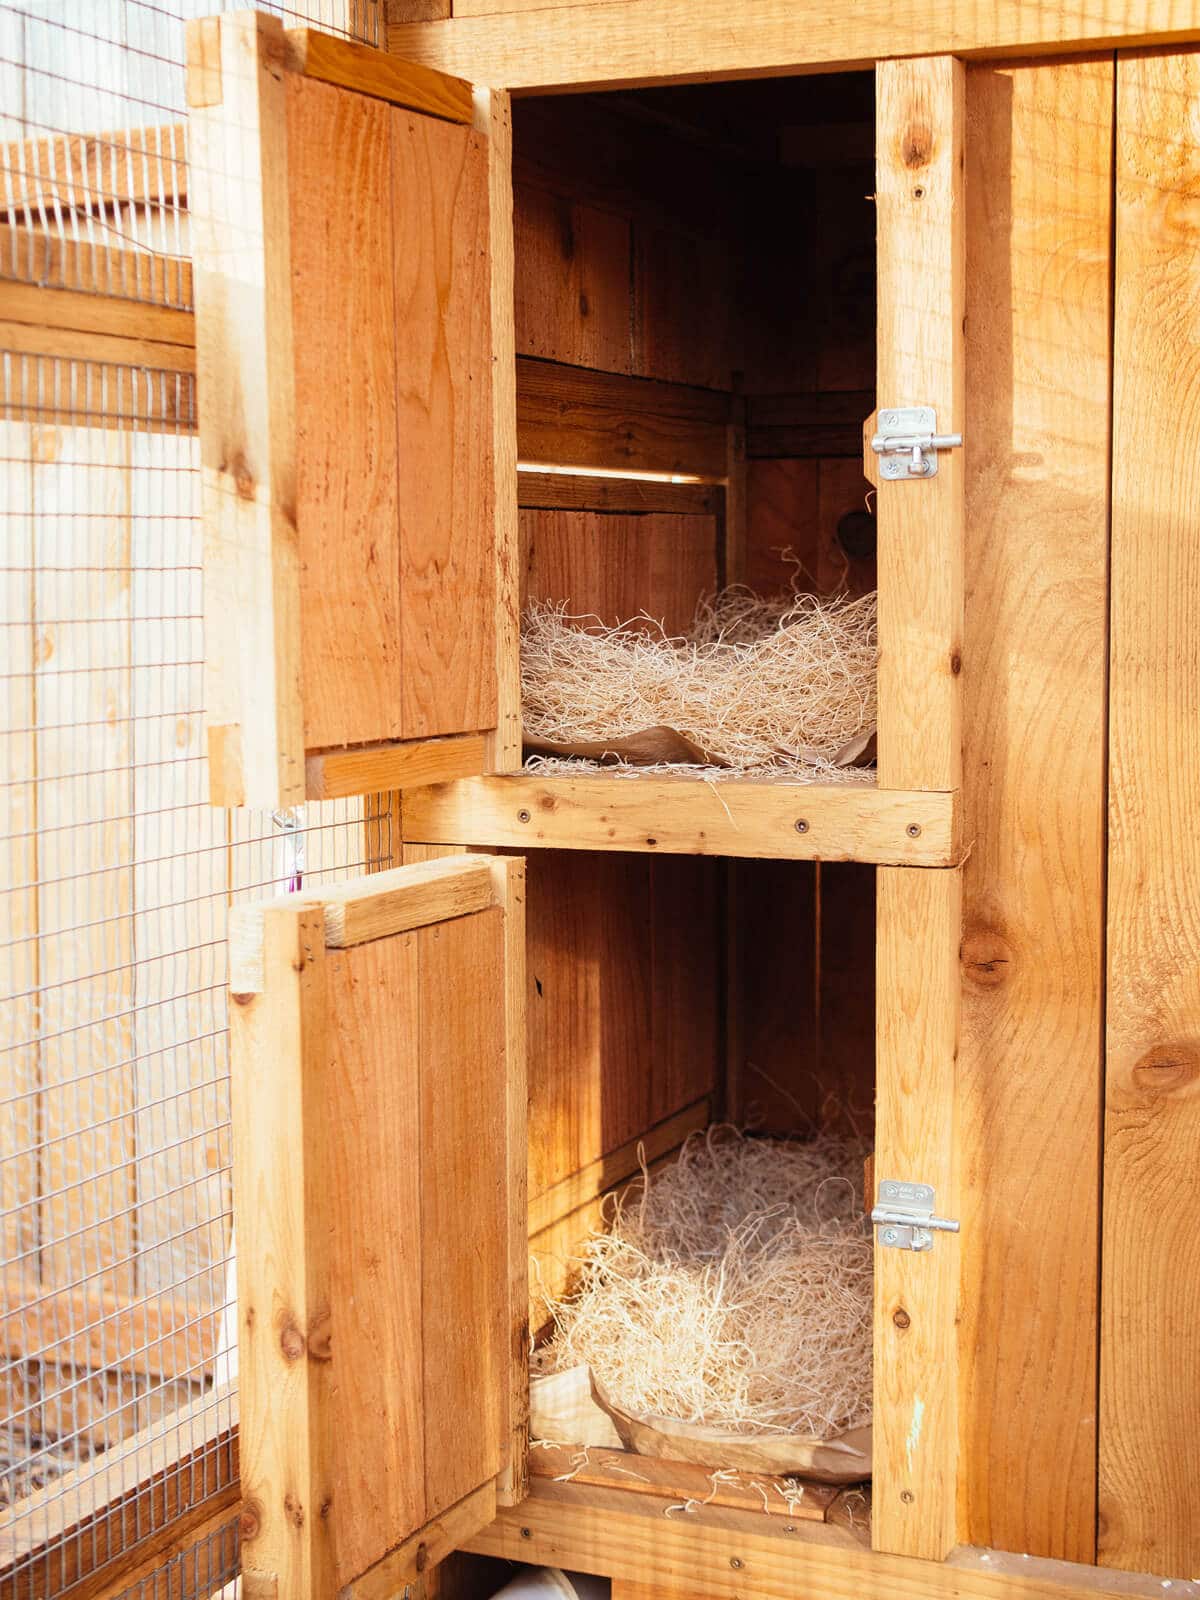 Easy access to nesting boxes